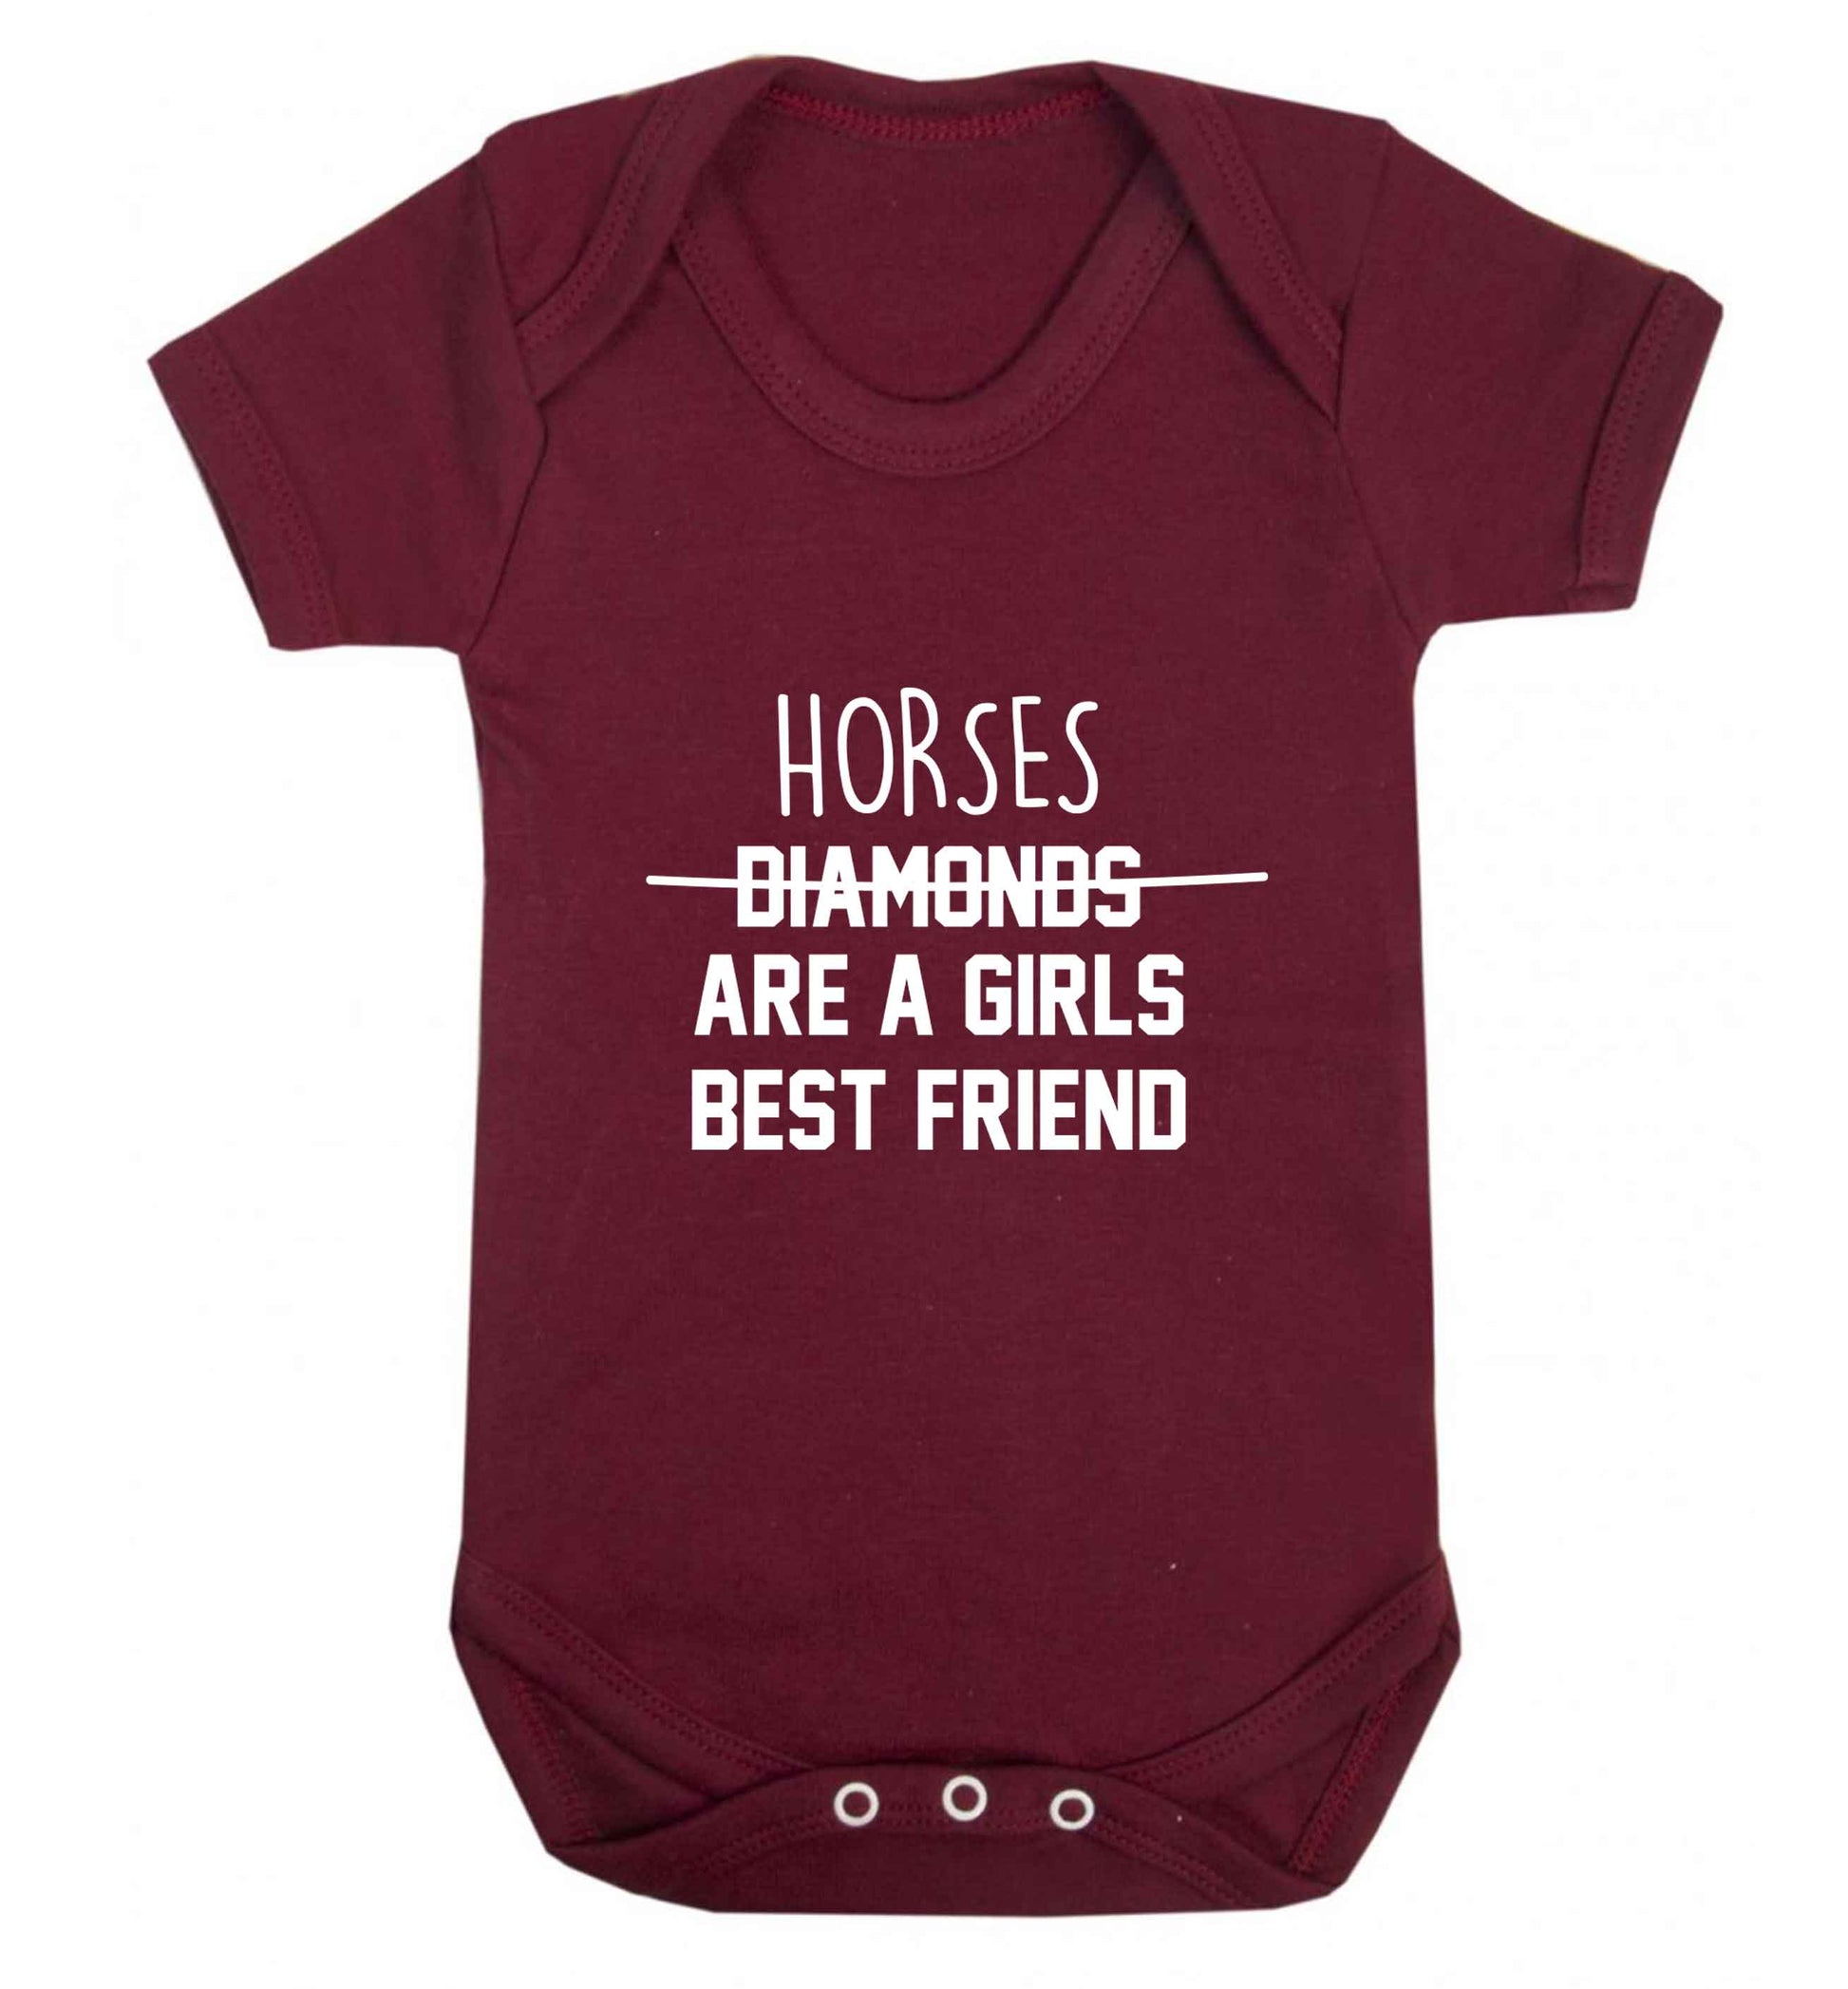 Horses are a girls best friend baby vest maroon 18-24 months